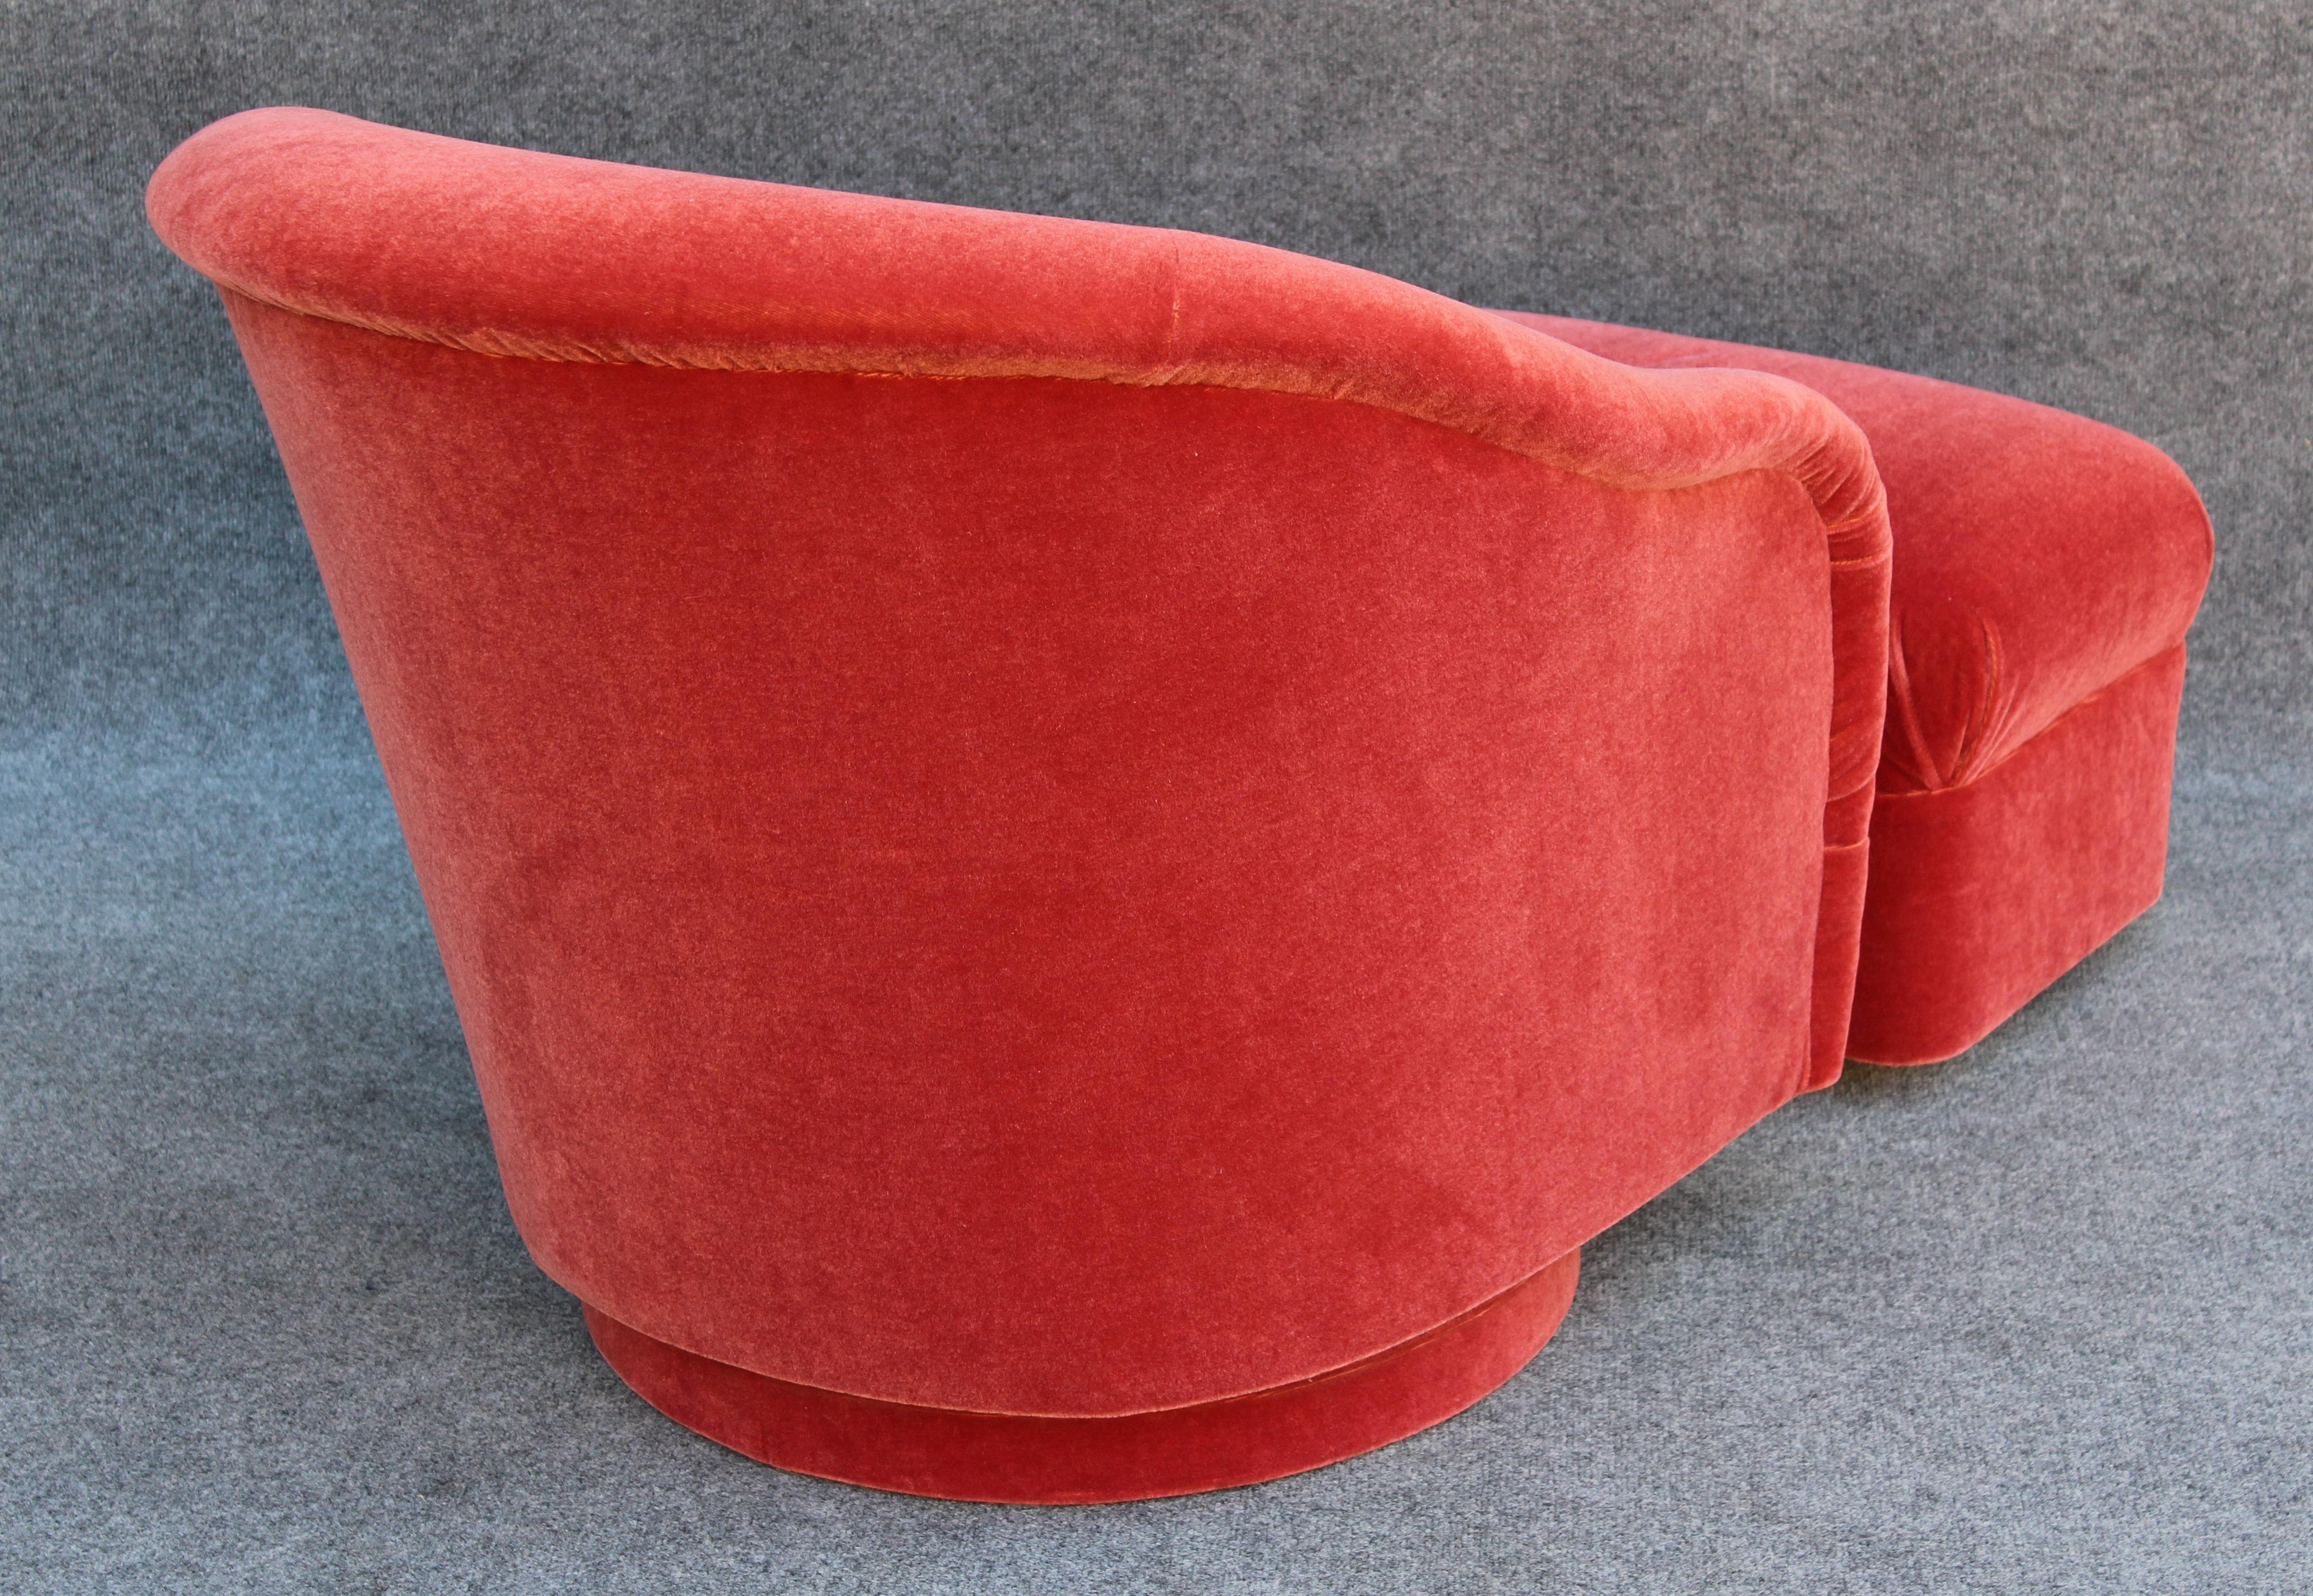 Late 20th Century Ward Bennett Brickel Red Mohair Upholstered Swivel Tub Lounge Chair With Ottoman For Sale